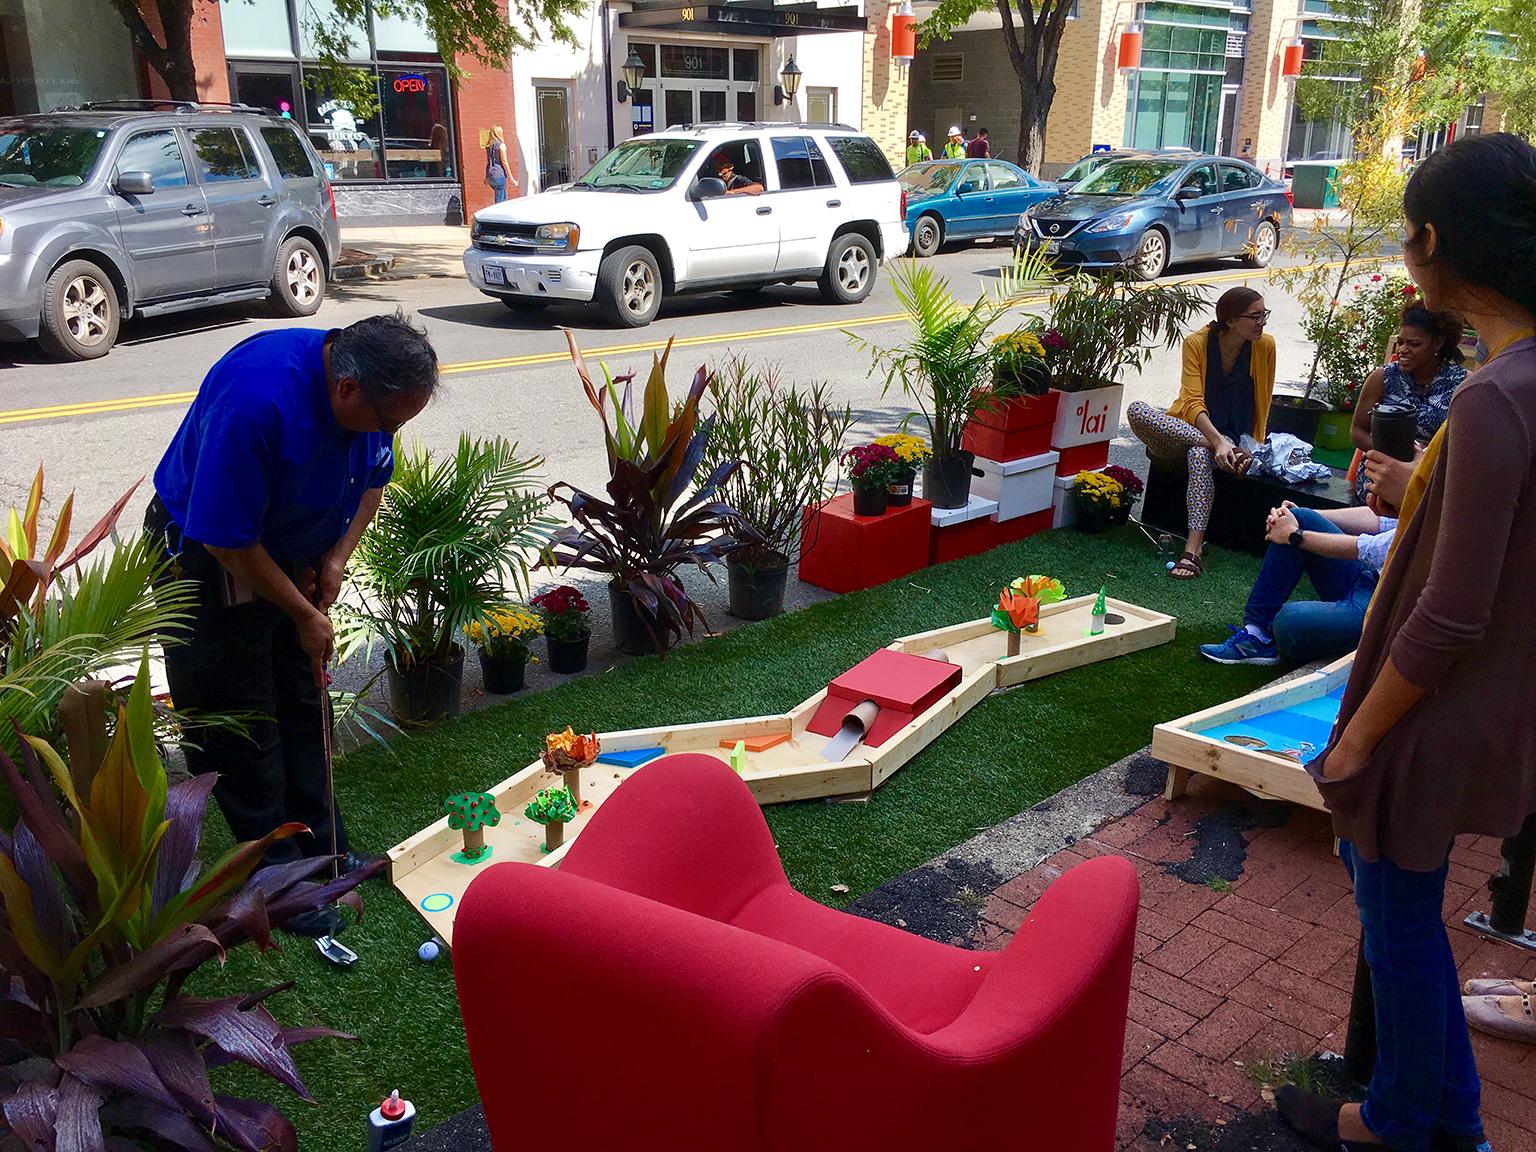 A miniature golf course takes over a parking space for PARK(ing) Day. (airbus777 / Flickr)